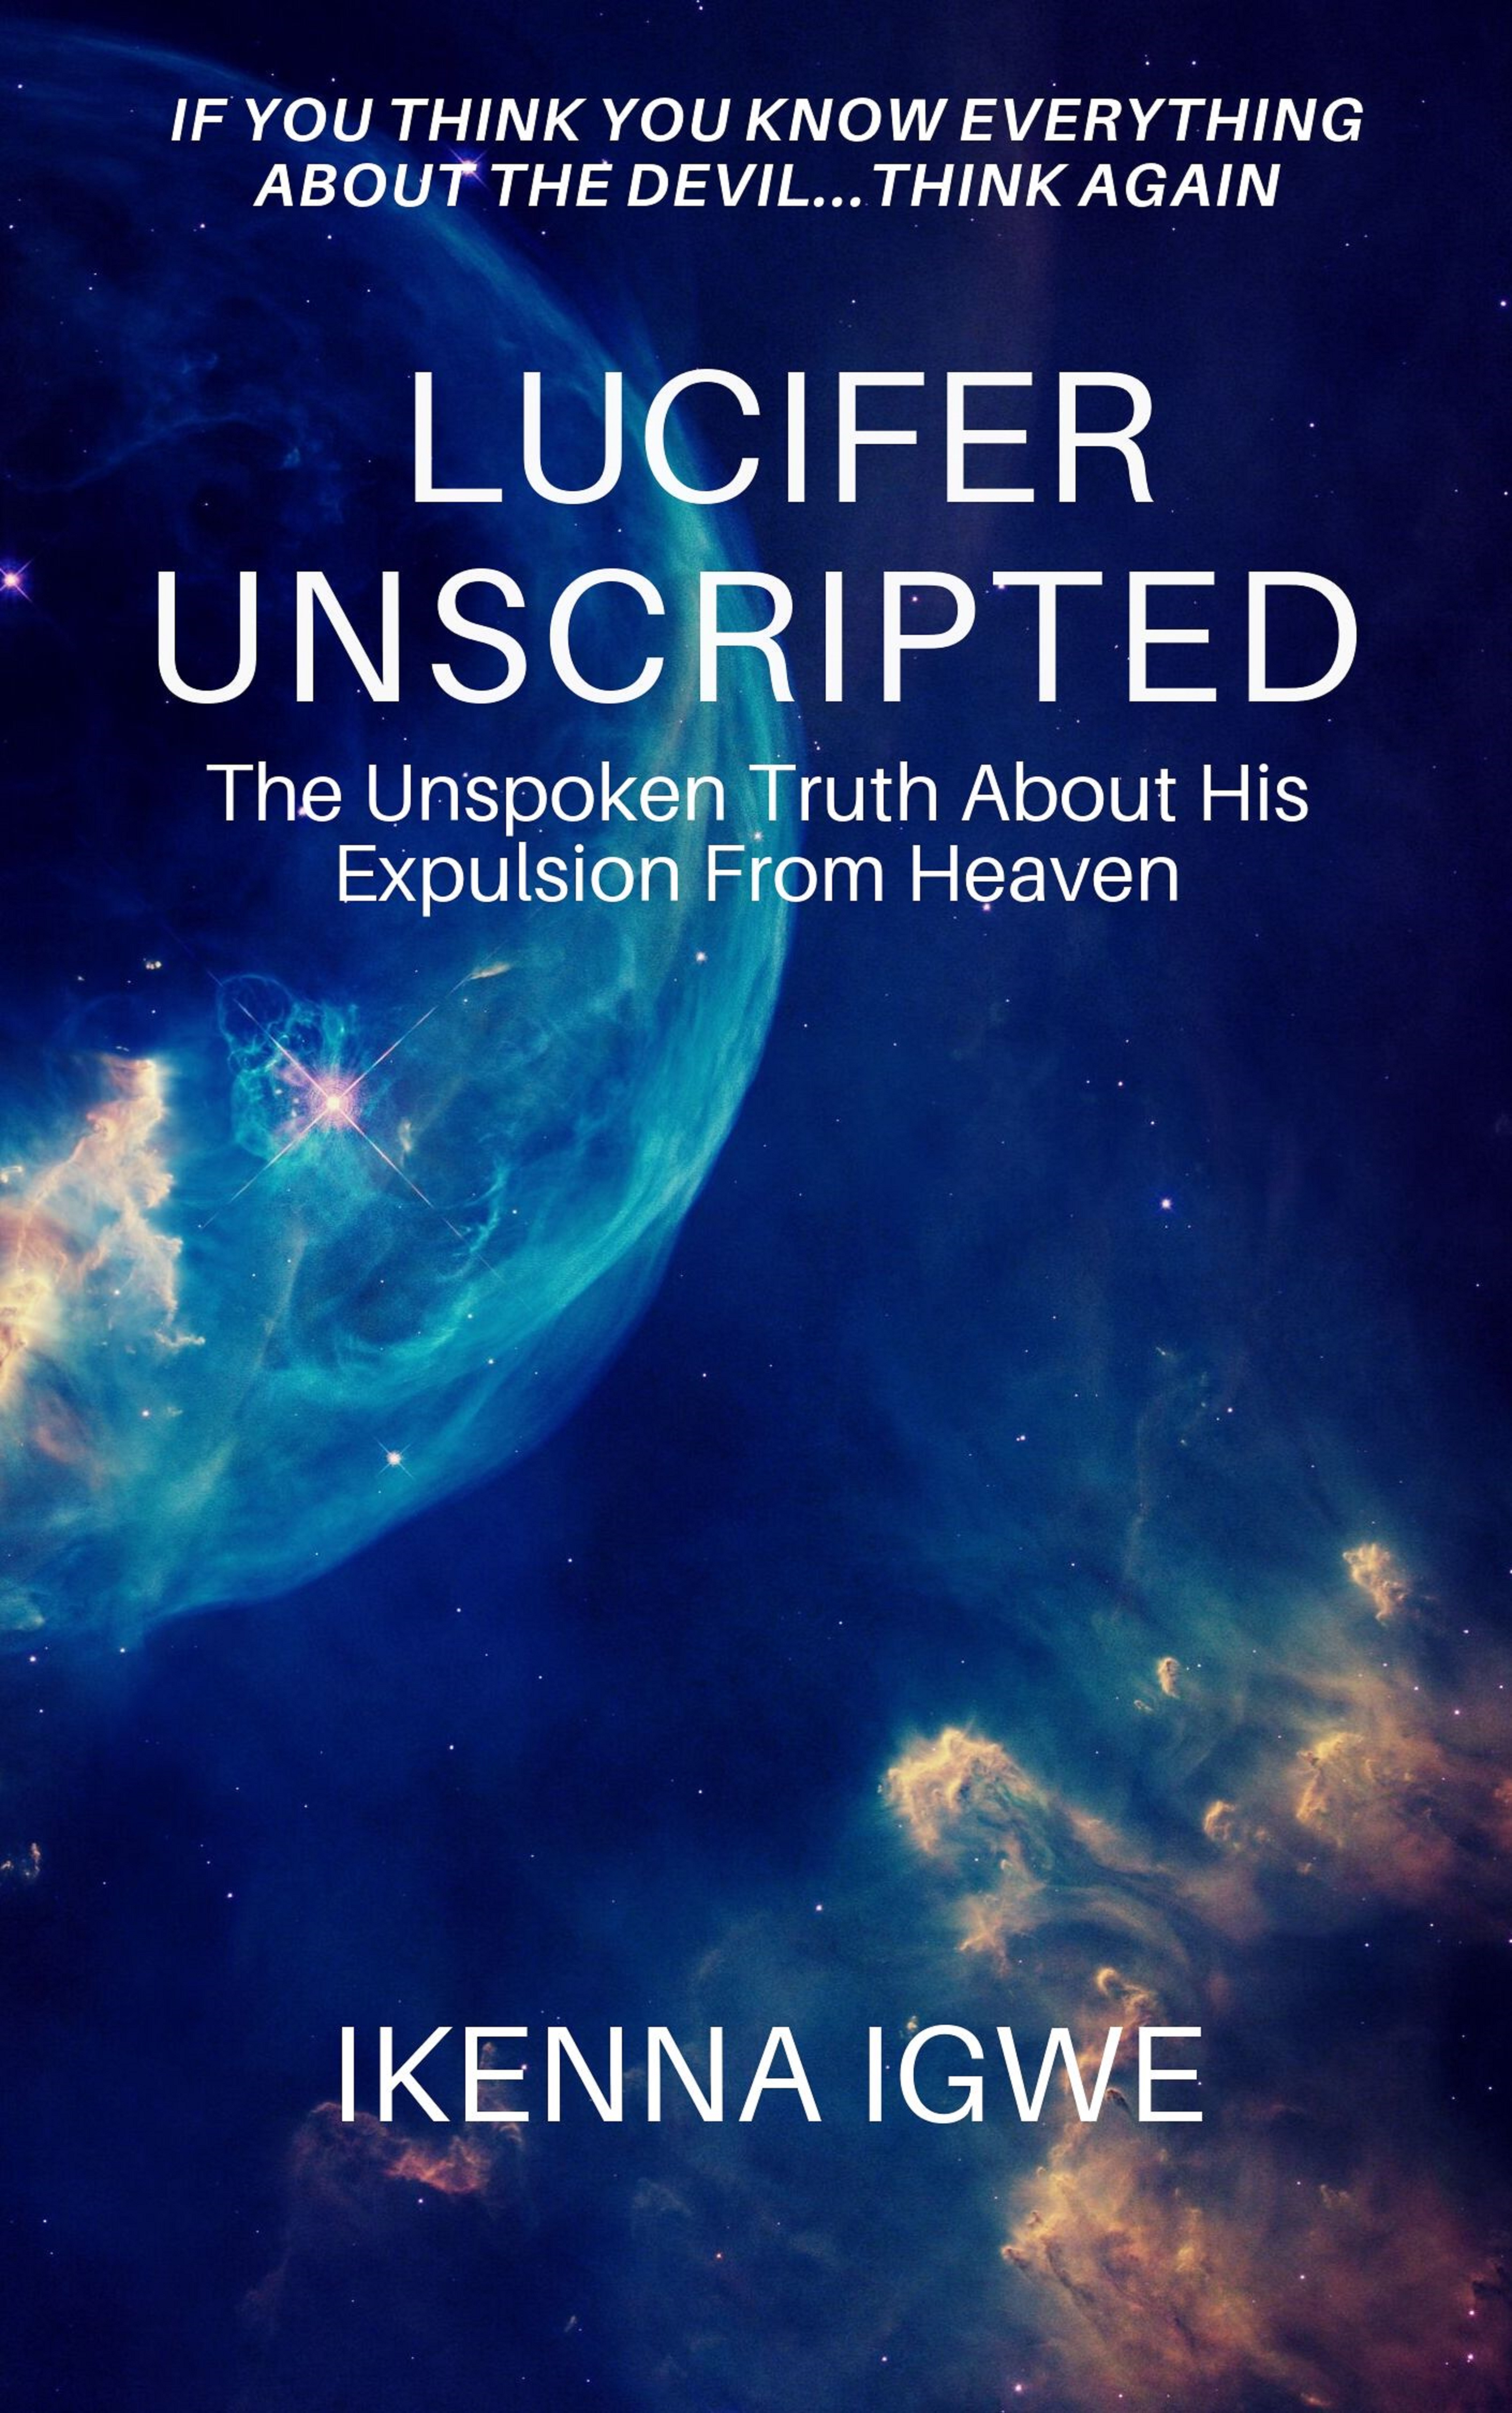 LUCIFER-UNSCRIPTED--The-Unspoken-Truth-About-His-Expulsion-From-Heaven